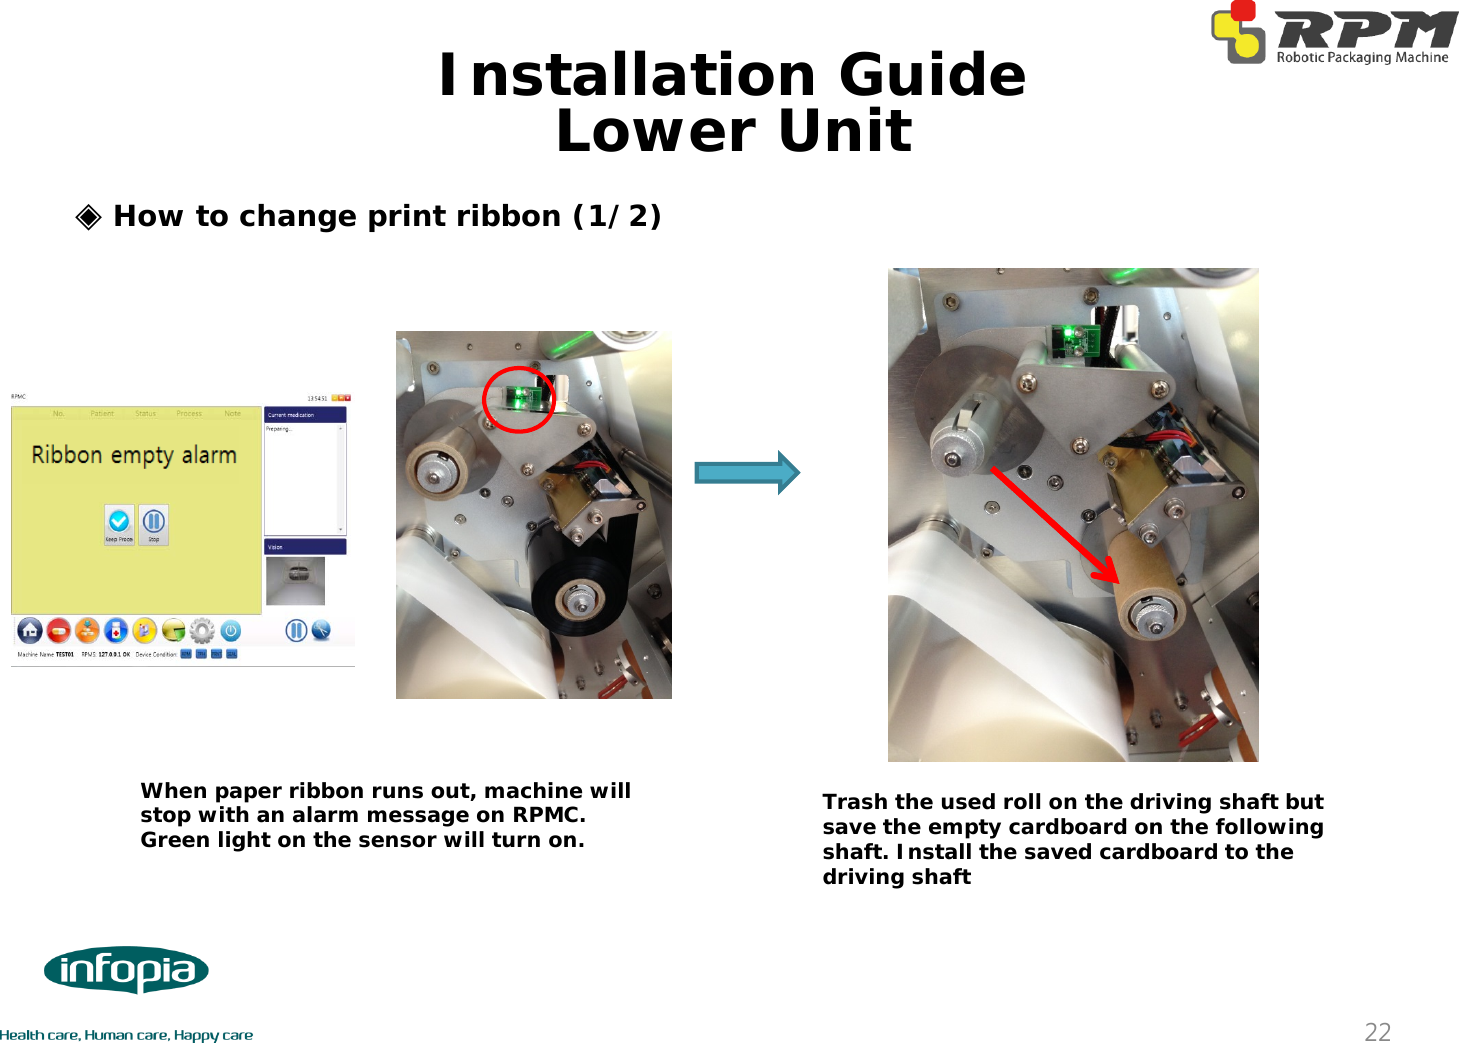 ◈How to change print ribbon (1/2)When paper ribbon runs out, machine will stop with an alarm message on RPMC. Green light on the sensor will turn on.Trash the used roll on the driving shaft but save the empty cardboard on the following shaft. Install the saved cardboard to the driving shaft22Lower UnitInstallation Guide